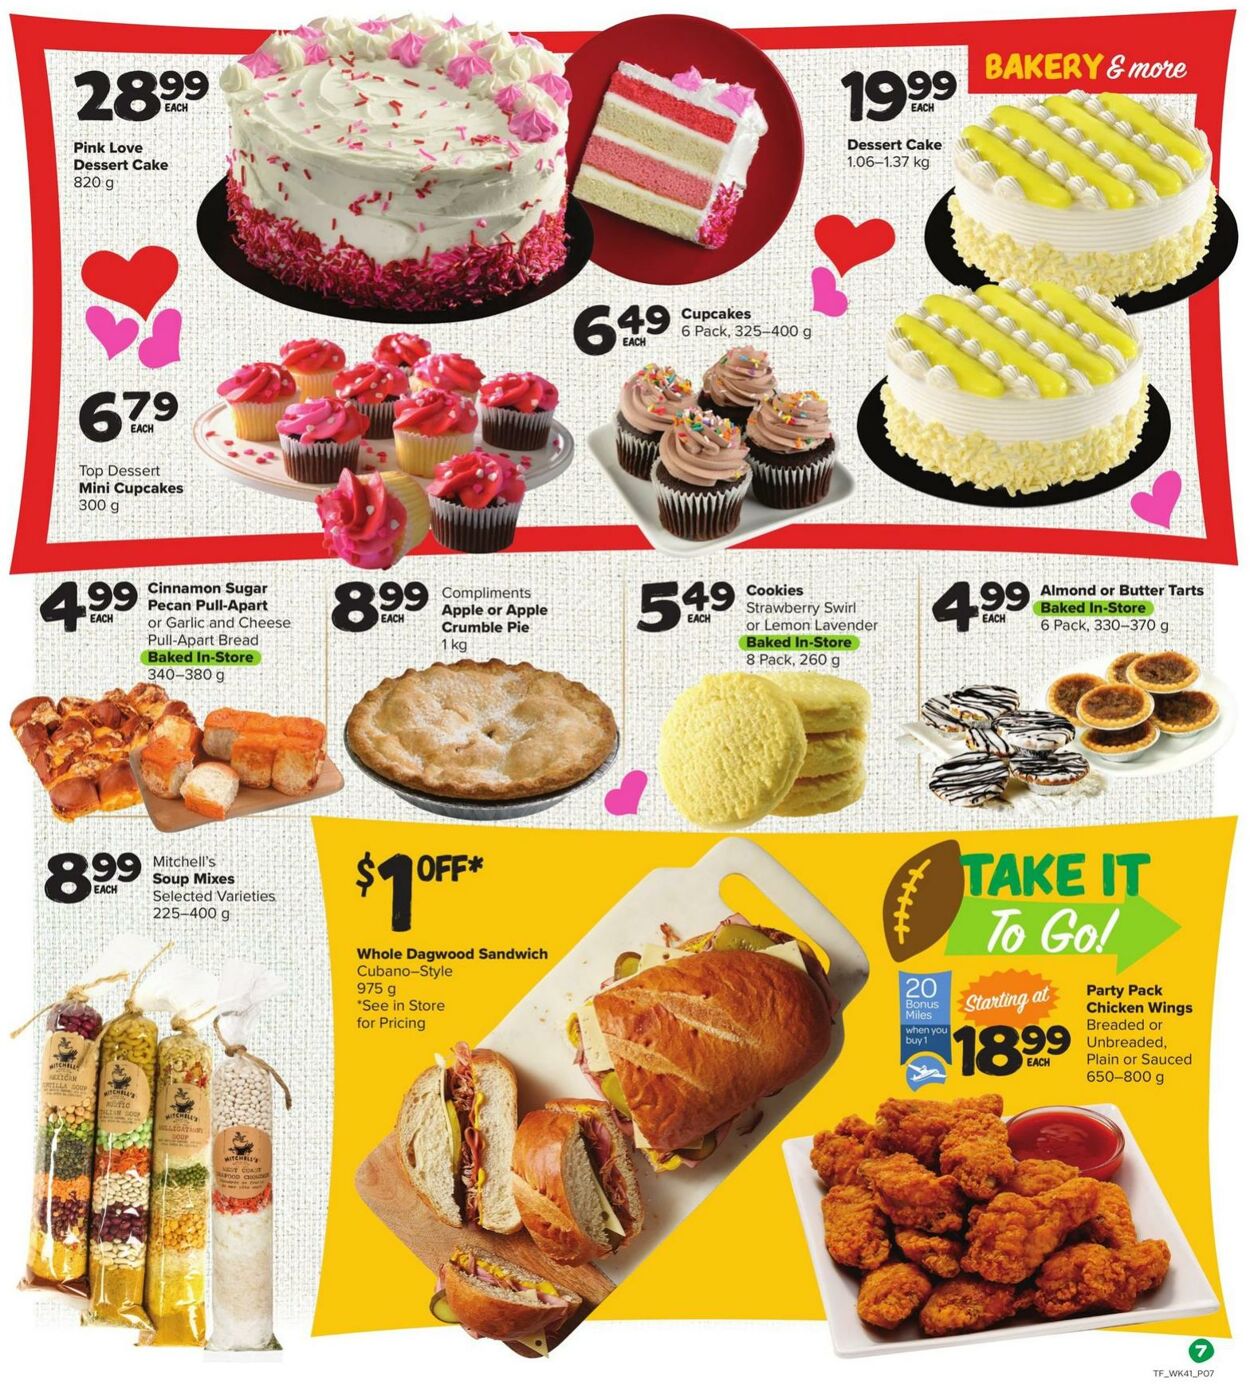 Flyer Thrifty Foods 09.02.2023 - 15.02.2023